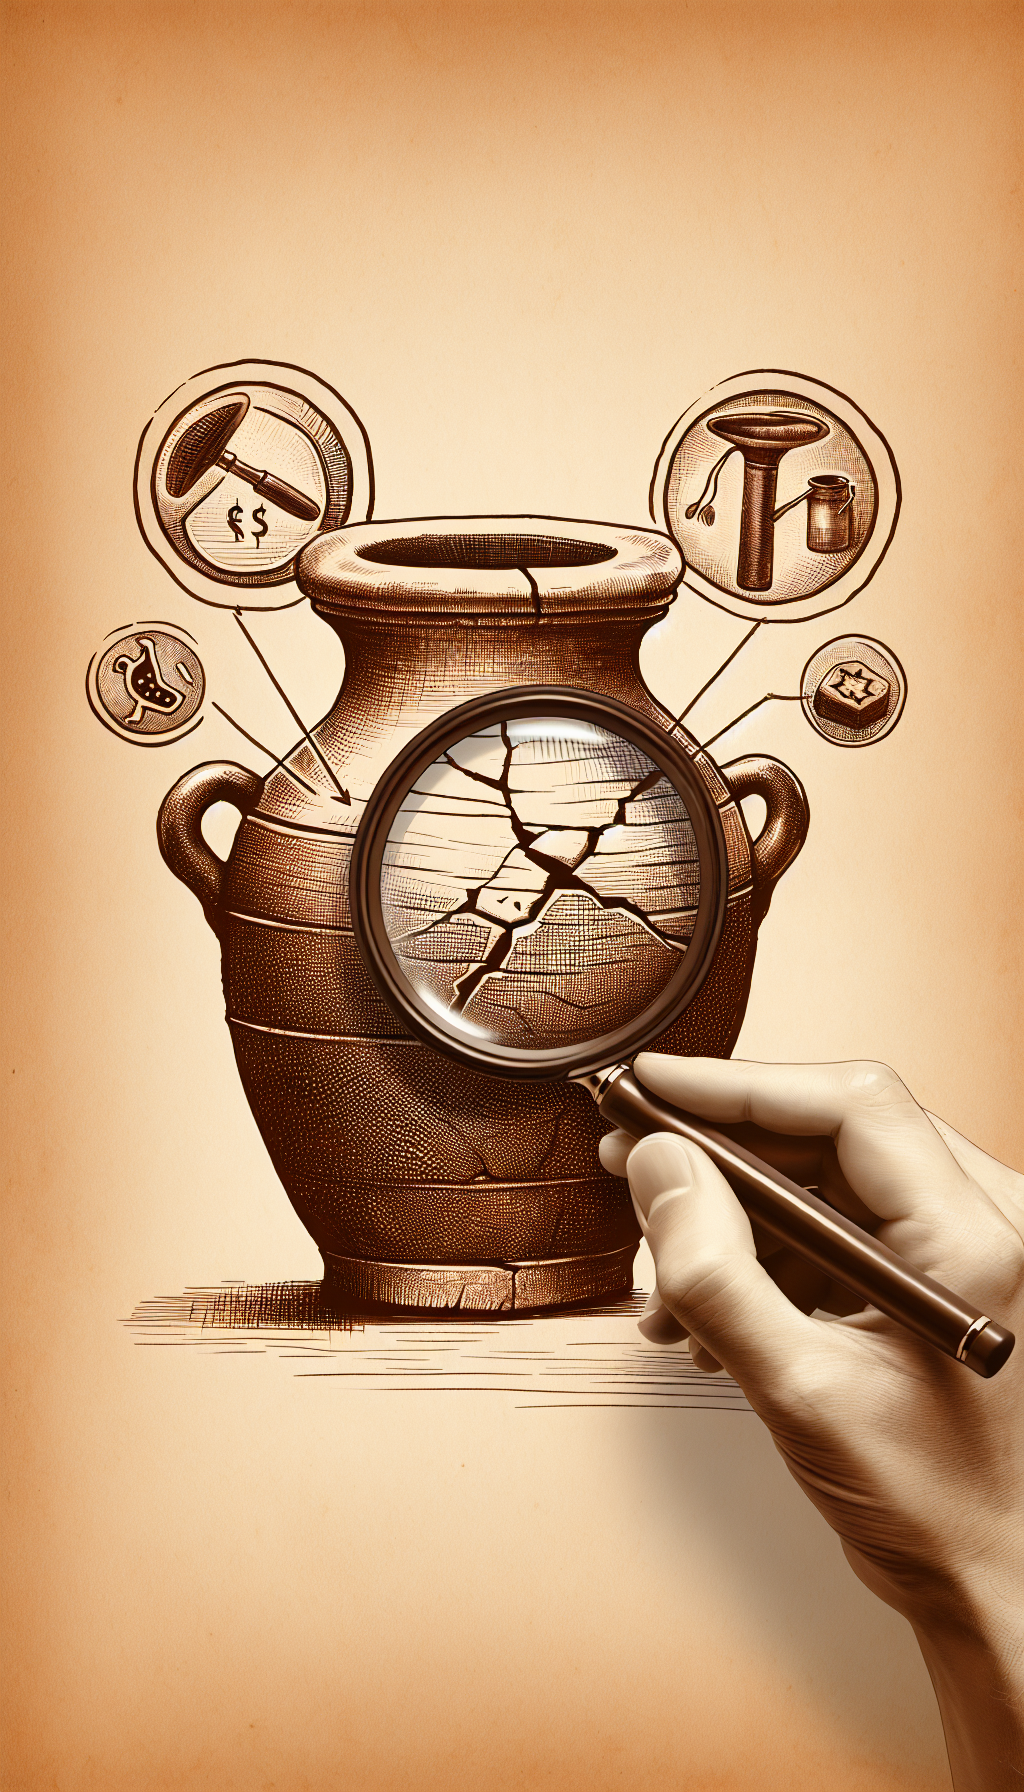 An illustration featuring a magnifying glass held over a vintage crock, with various icons within its lens, such as a crack, a maker’s mark, and patina, symbolizing the key factors assessed for value. The crock sits atop a price-tag-shaped pedestal, blending styles of sketch, watercolor, and sepia tones to underscore the antiquity and diverse elements that determine the crock’s worth.